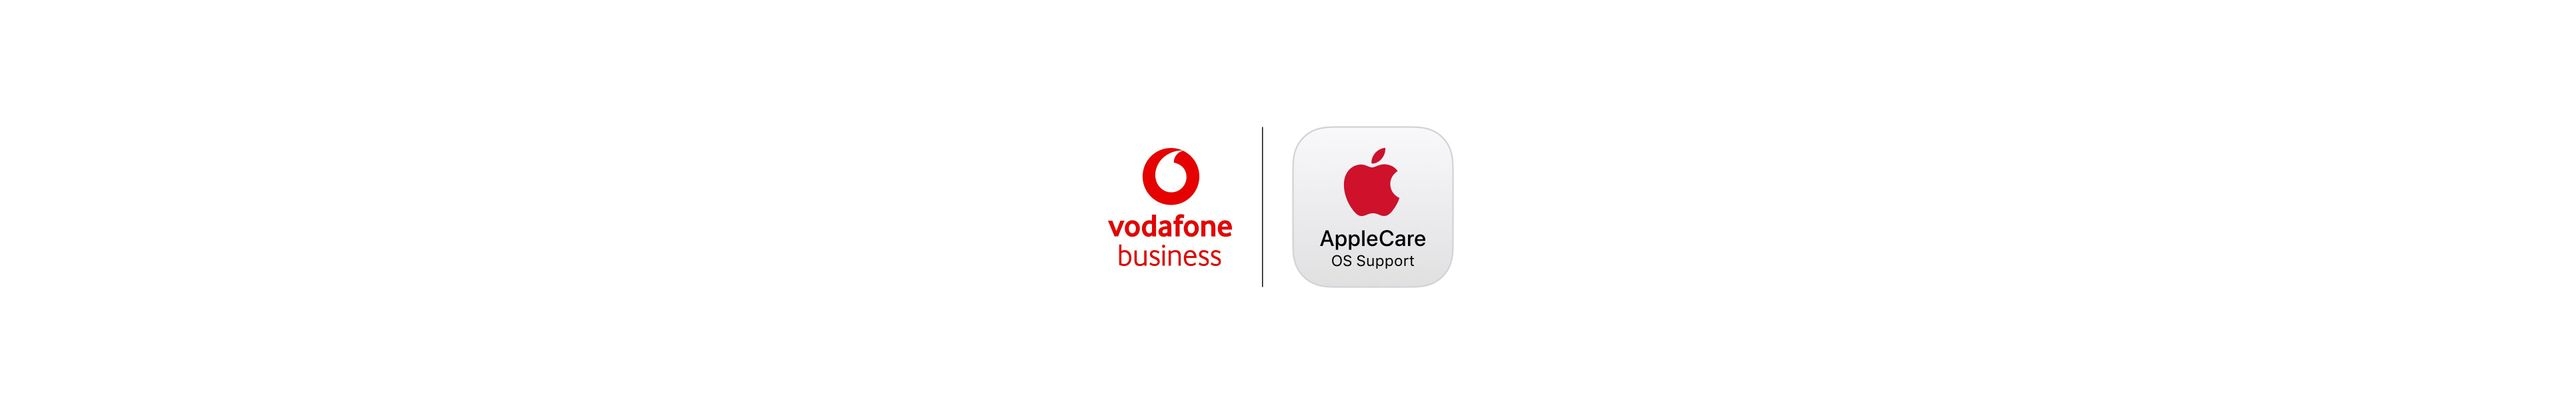 Vodafone Business x AppleCare OS Support